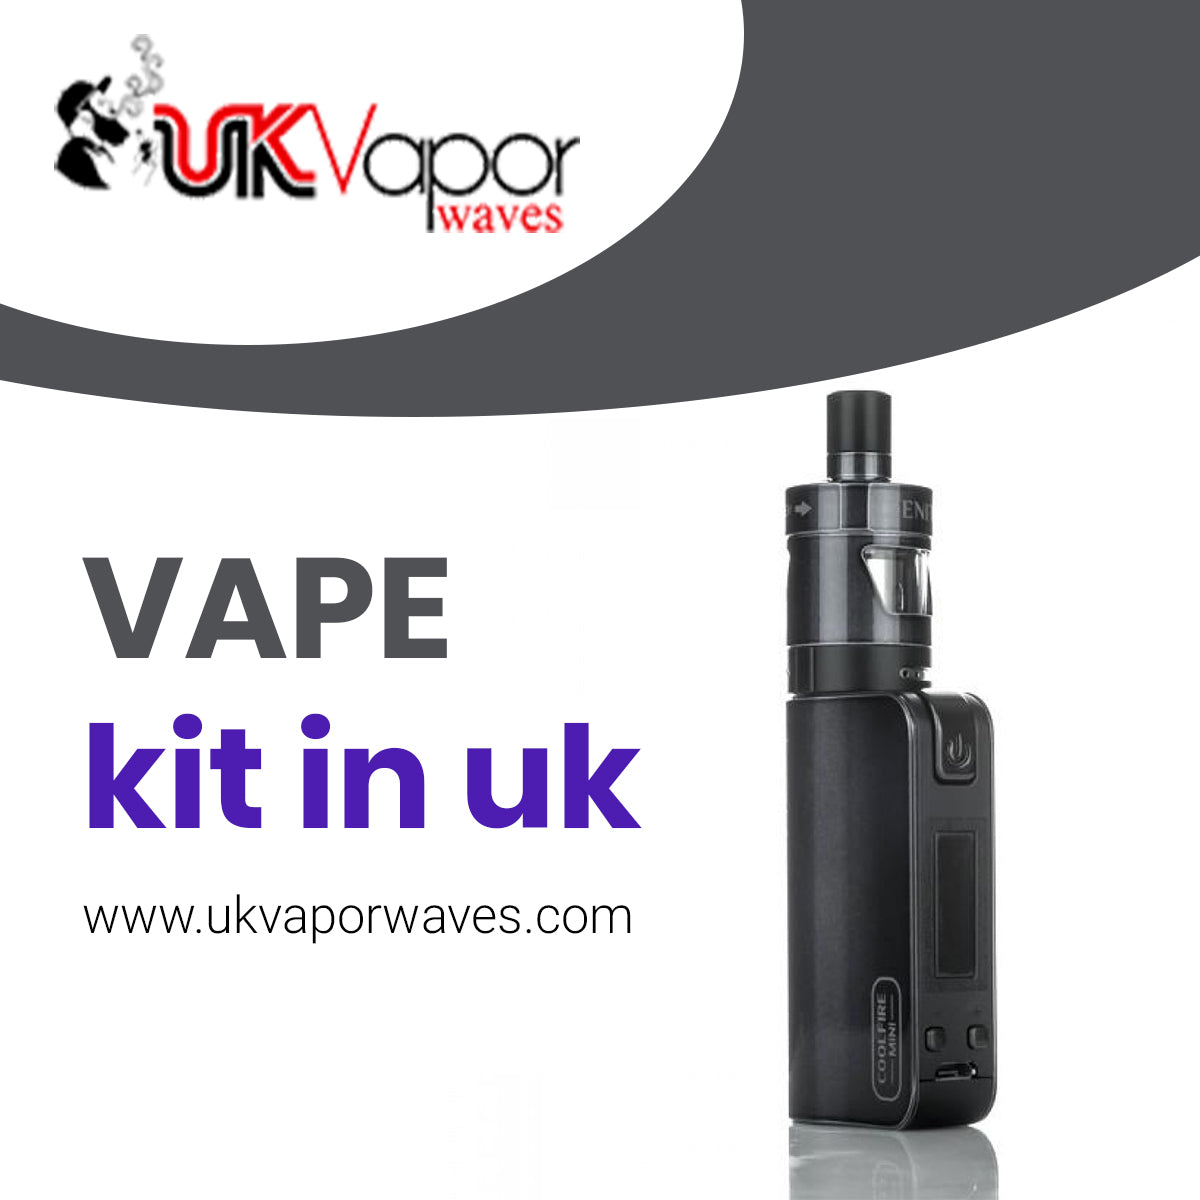 Virtues of Vaping You Need To Know